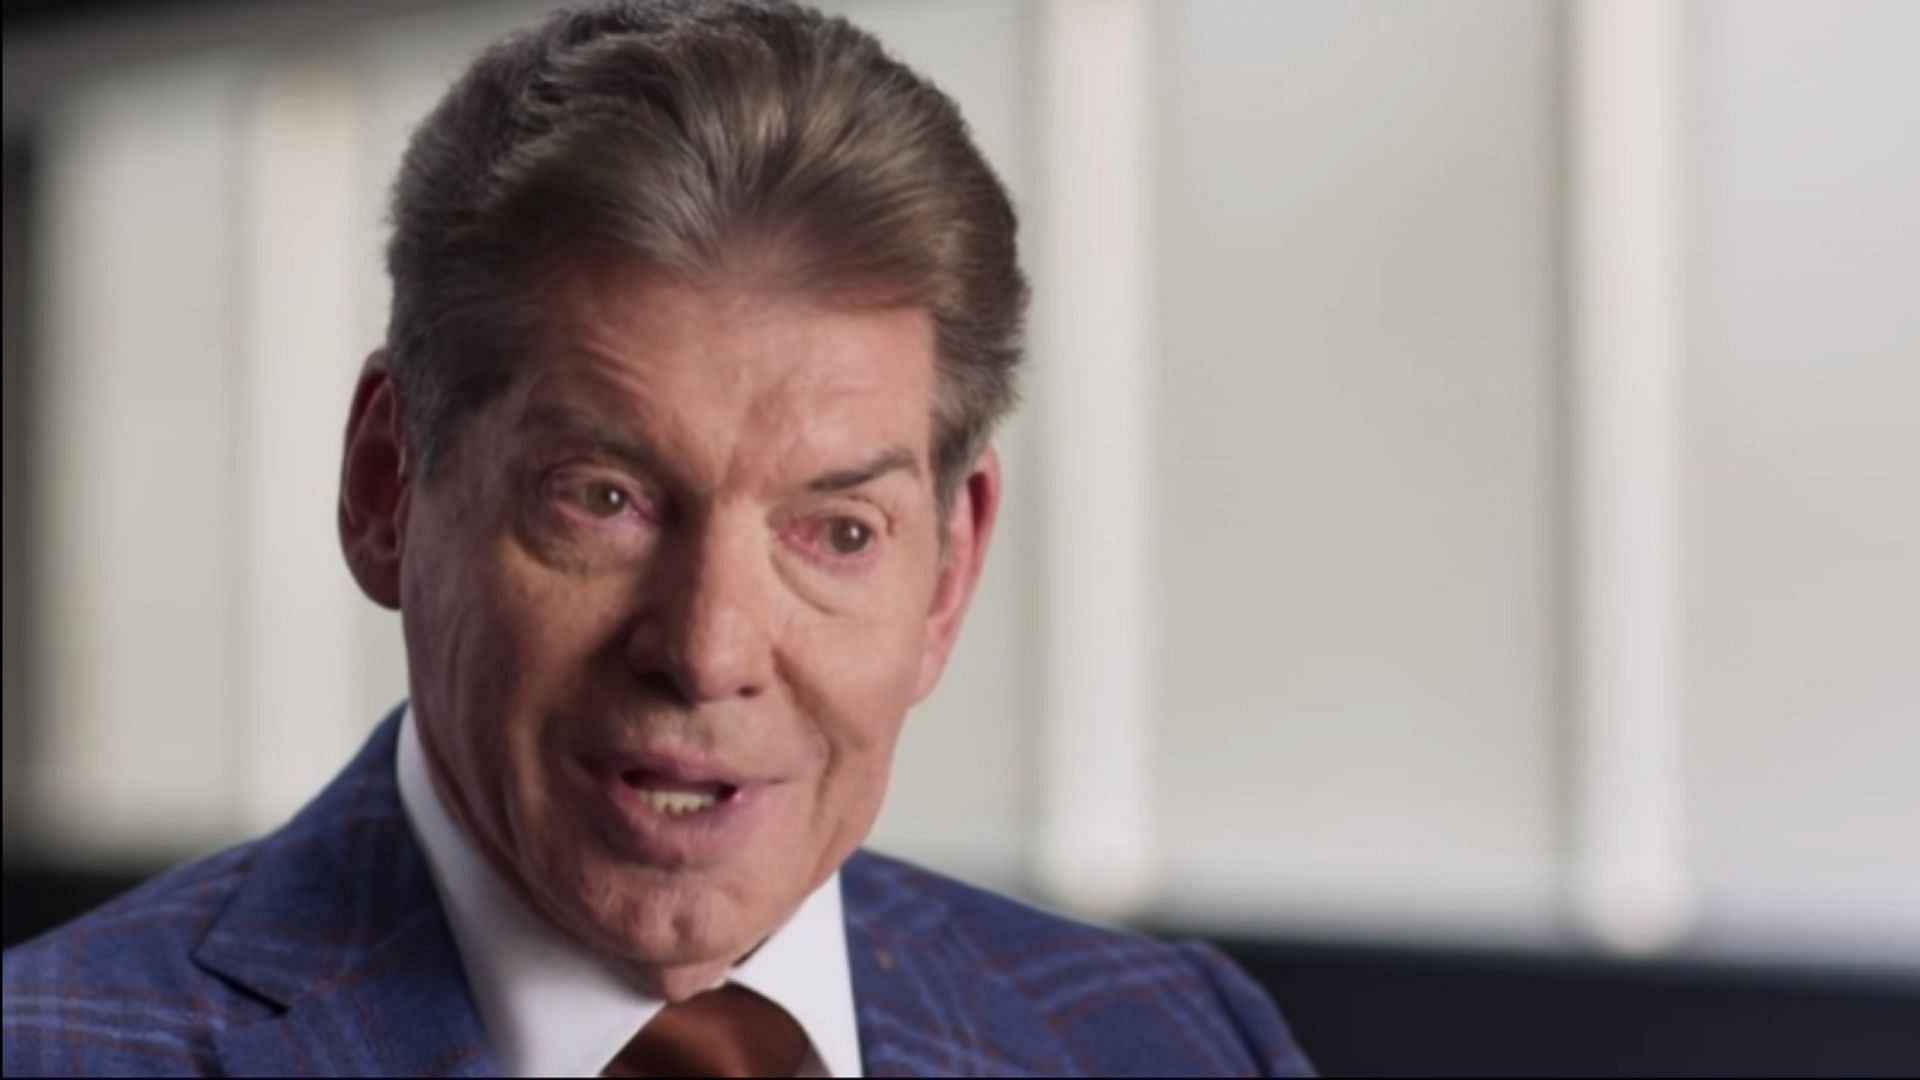 Vince McMahon was known as Mr. McMahon on WWE TV